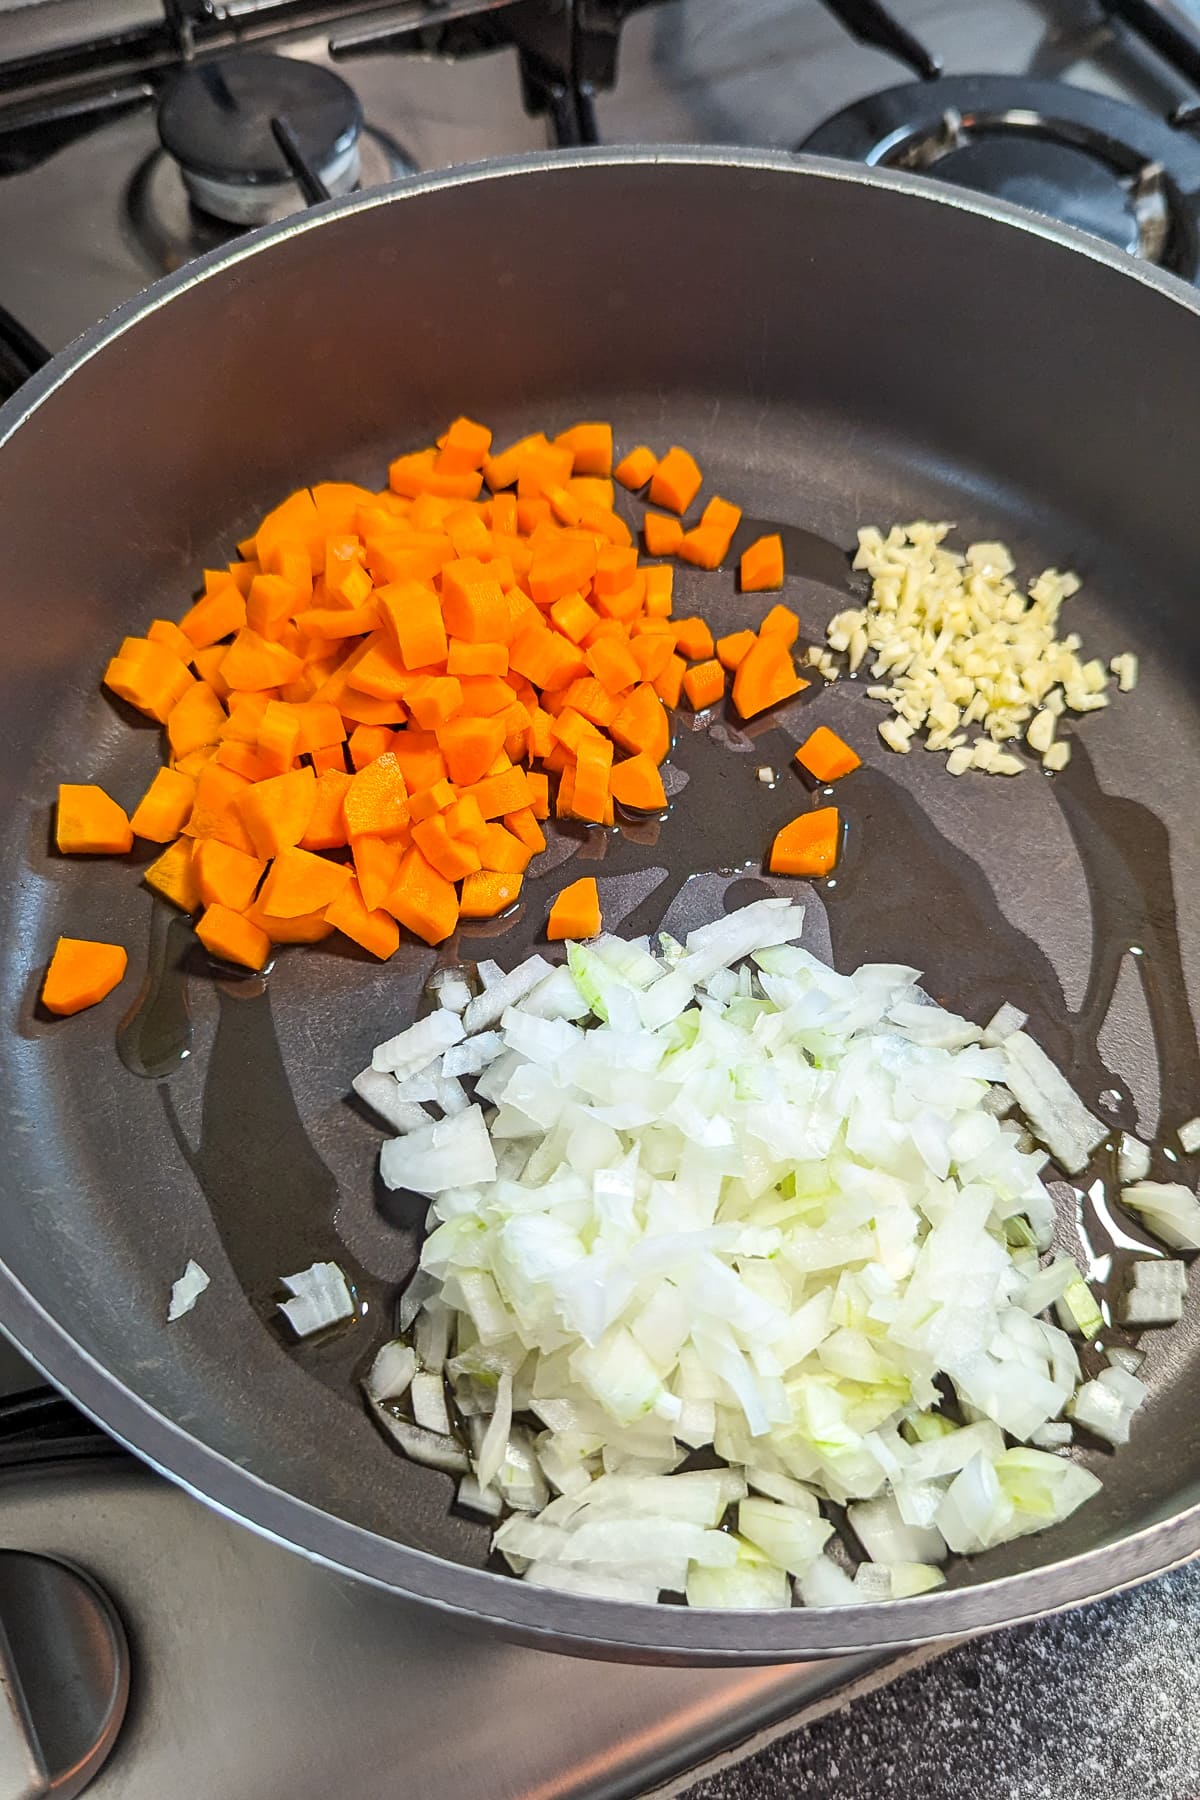 Frying pan with chopped carrots, onions and garlic.